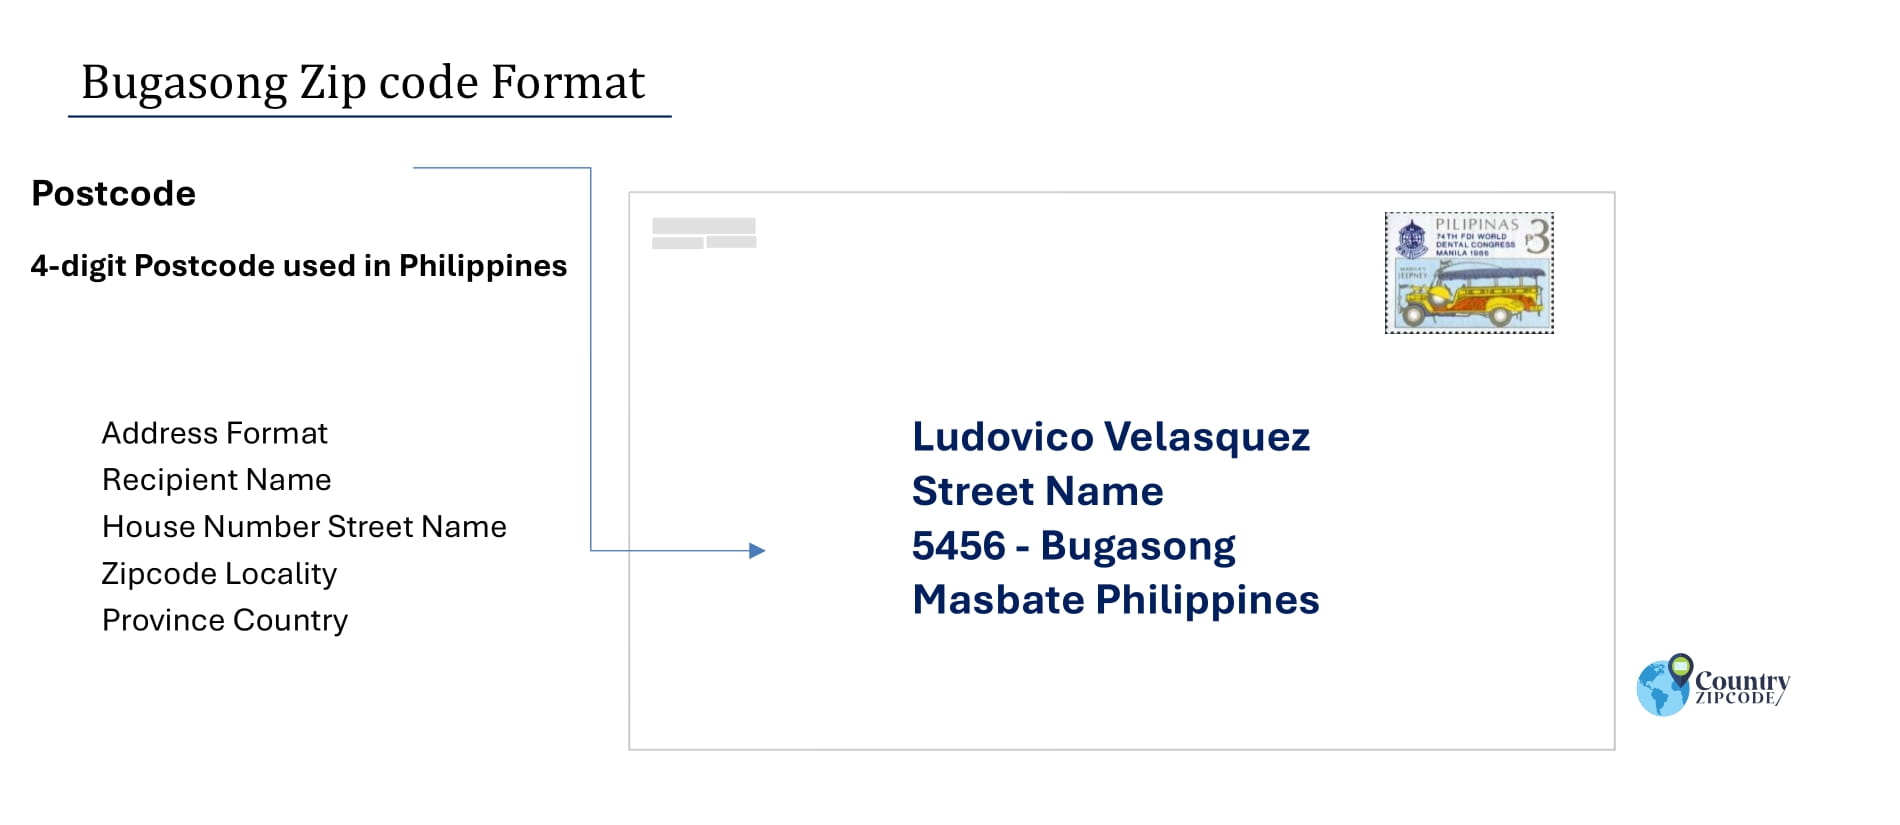 example of Bugasong Philippines zip code and address format